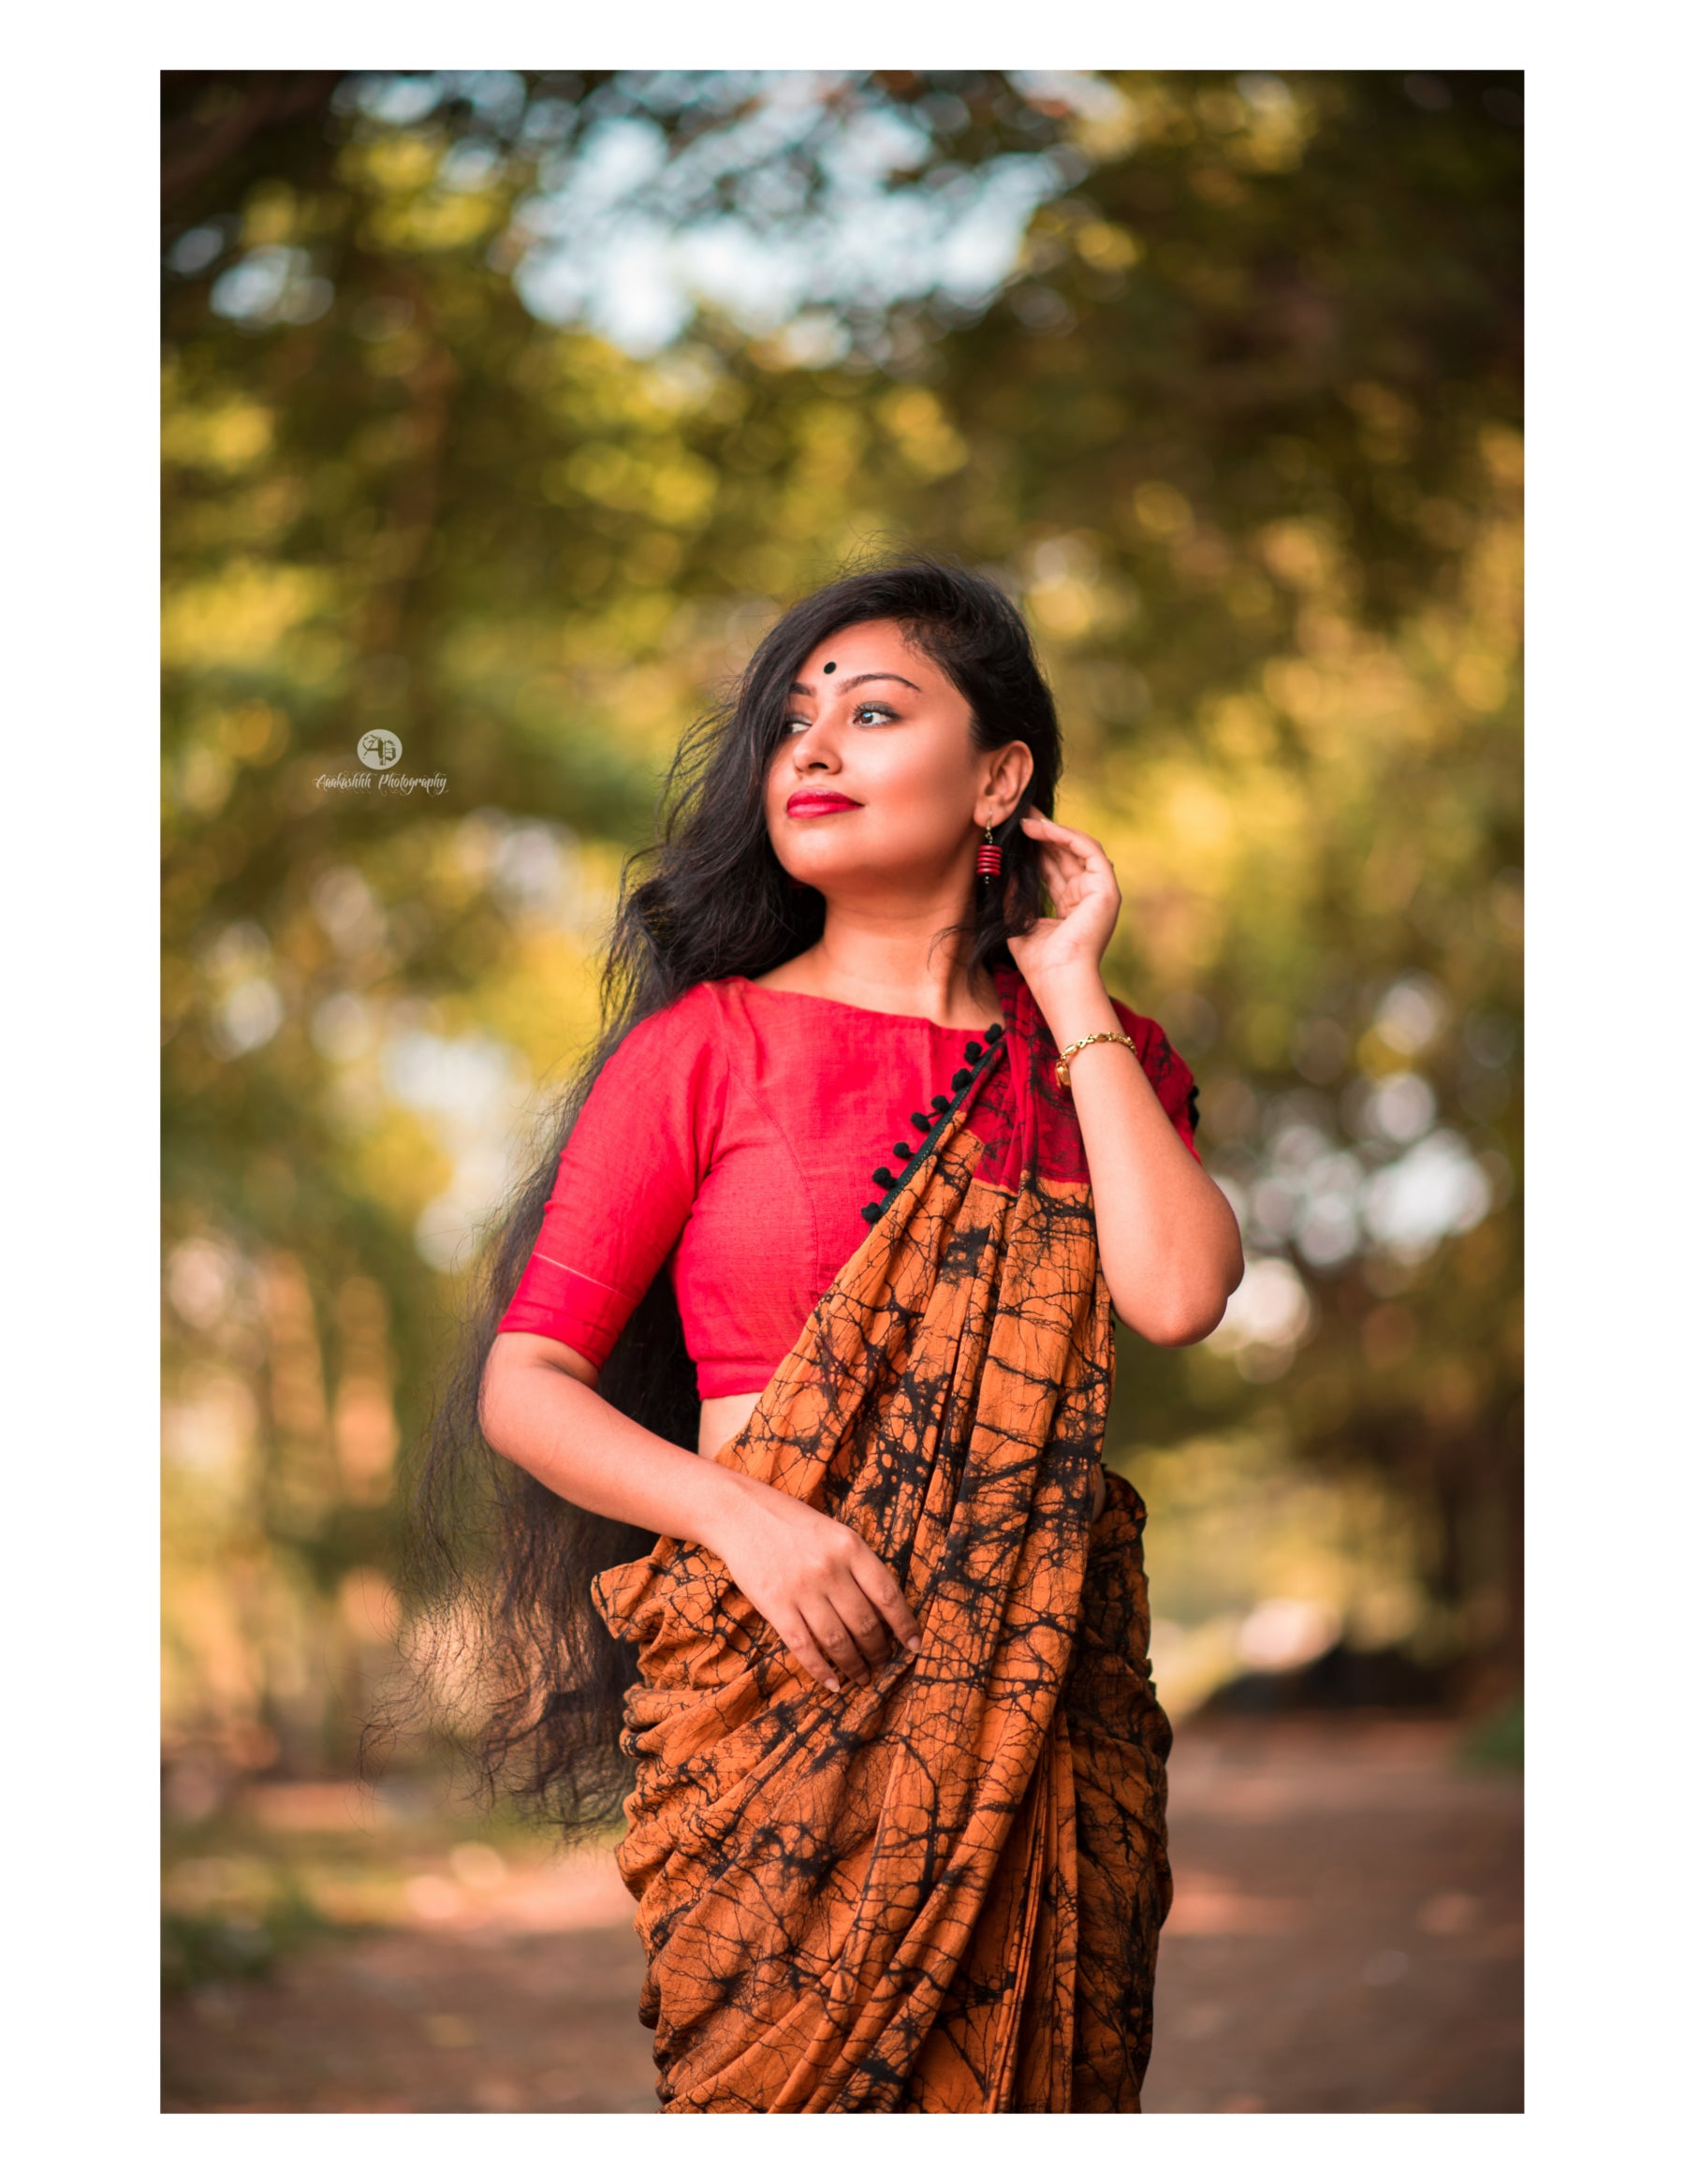 Indian Women In Saree Pictures | Download Free Images on Unsplash